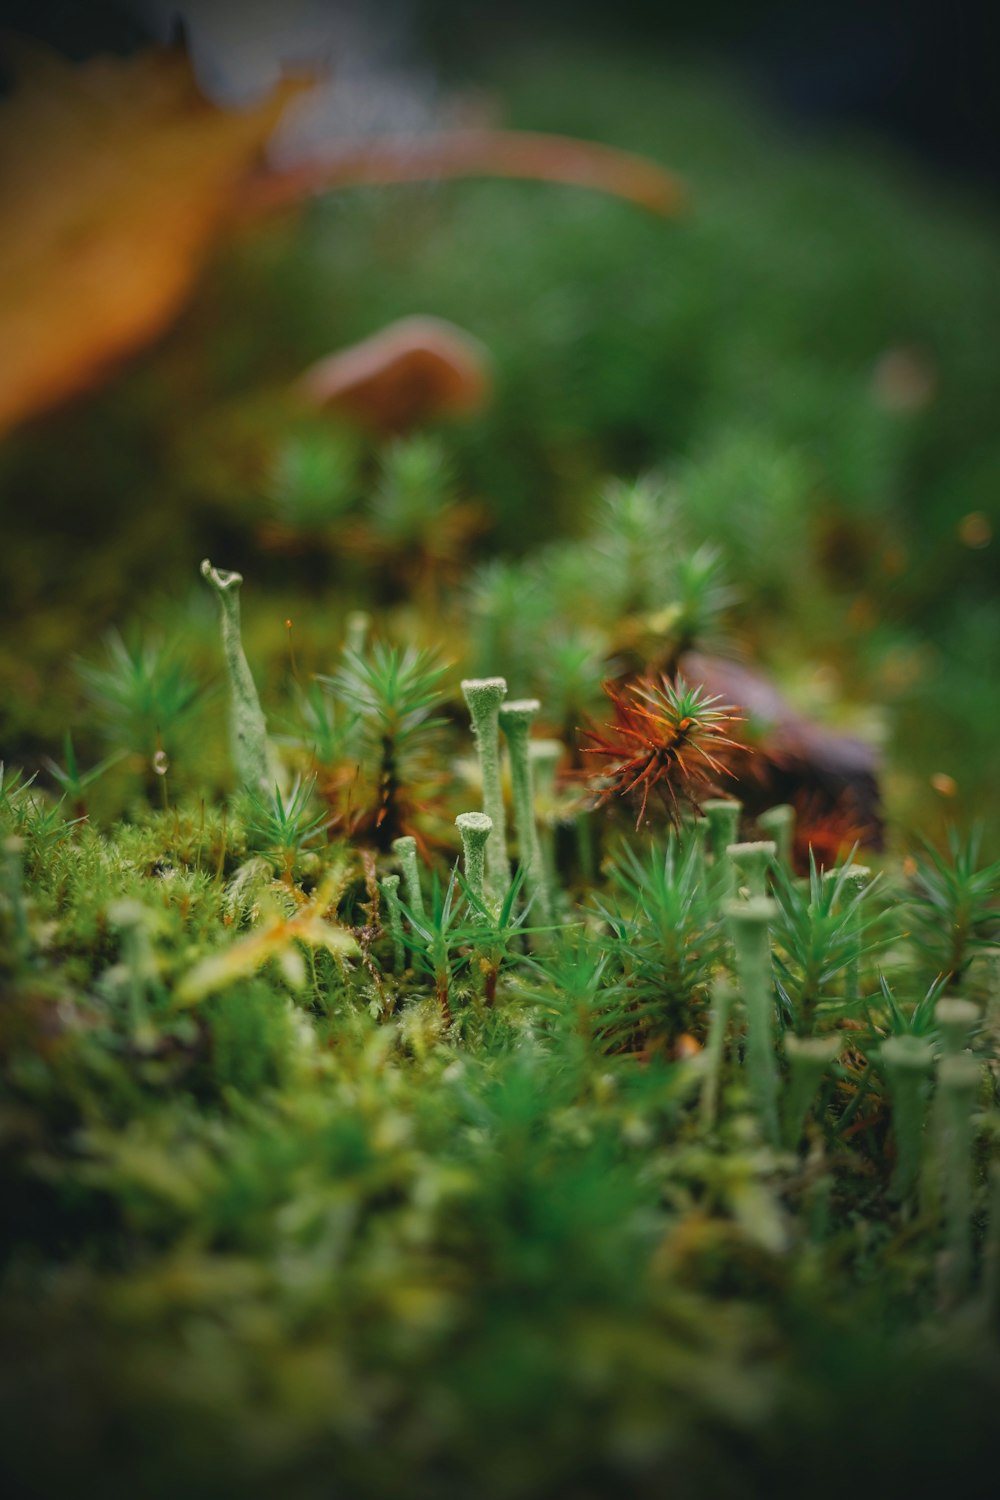 a close up of a mossy surface with small plants